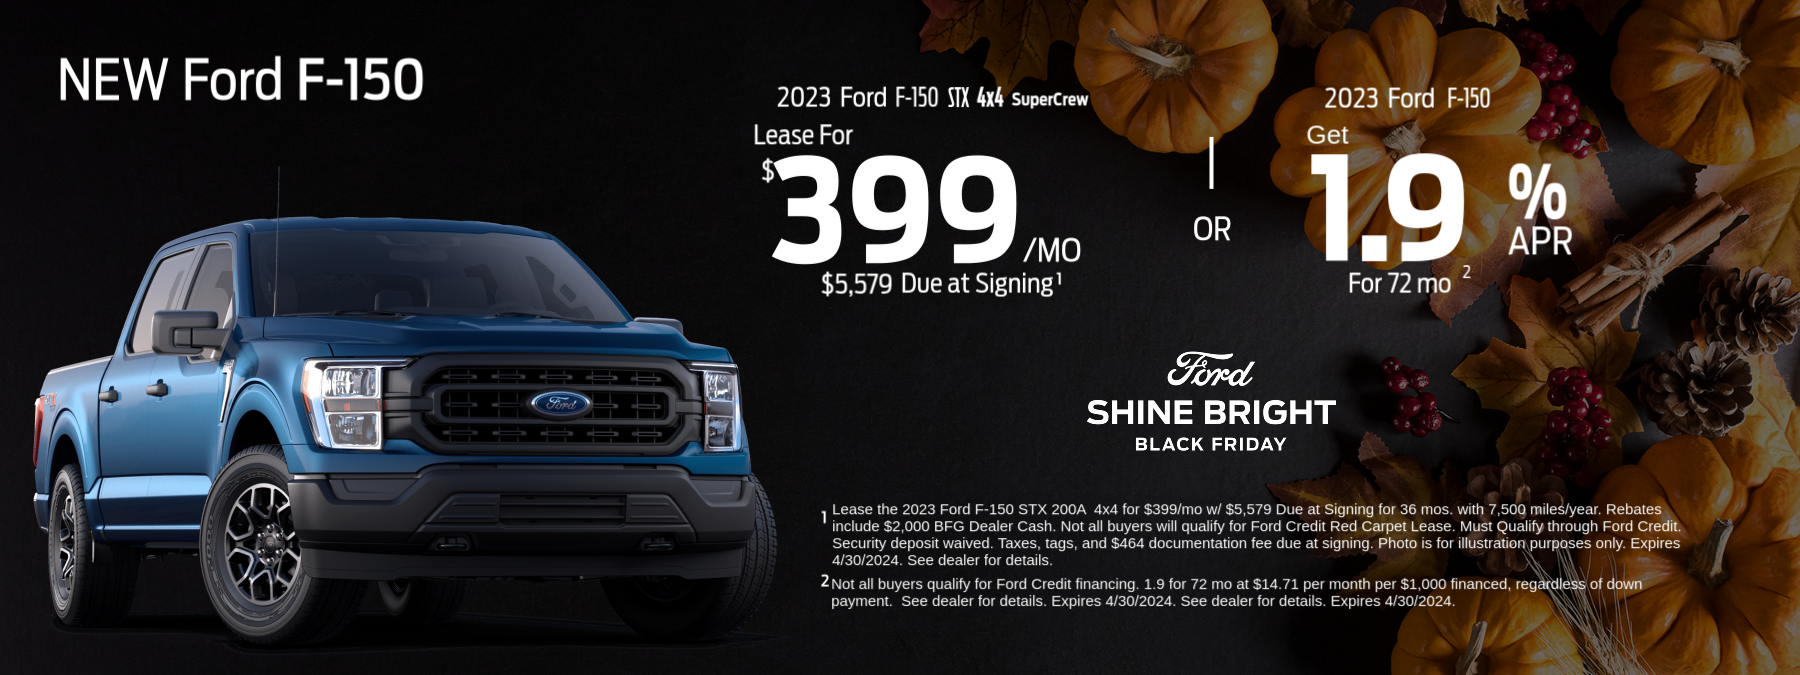 Check out great new offers on the Ford F-150!